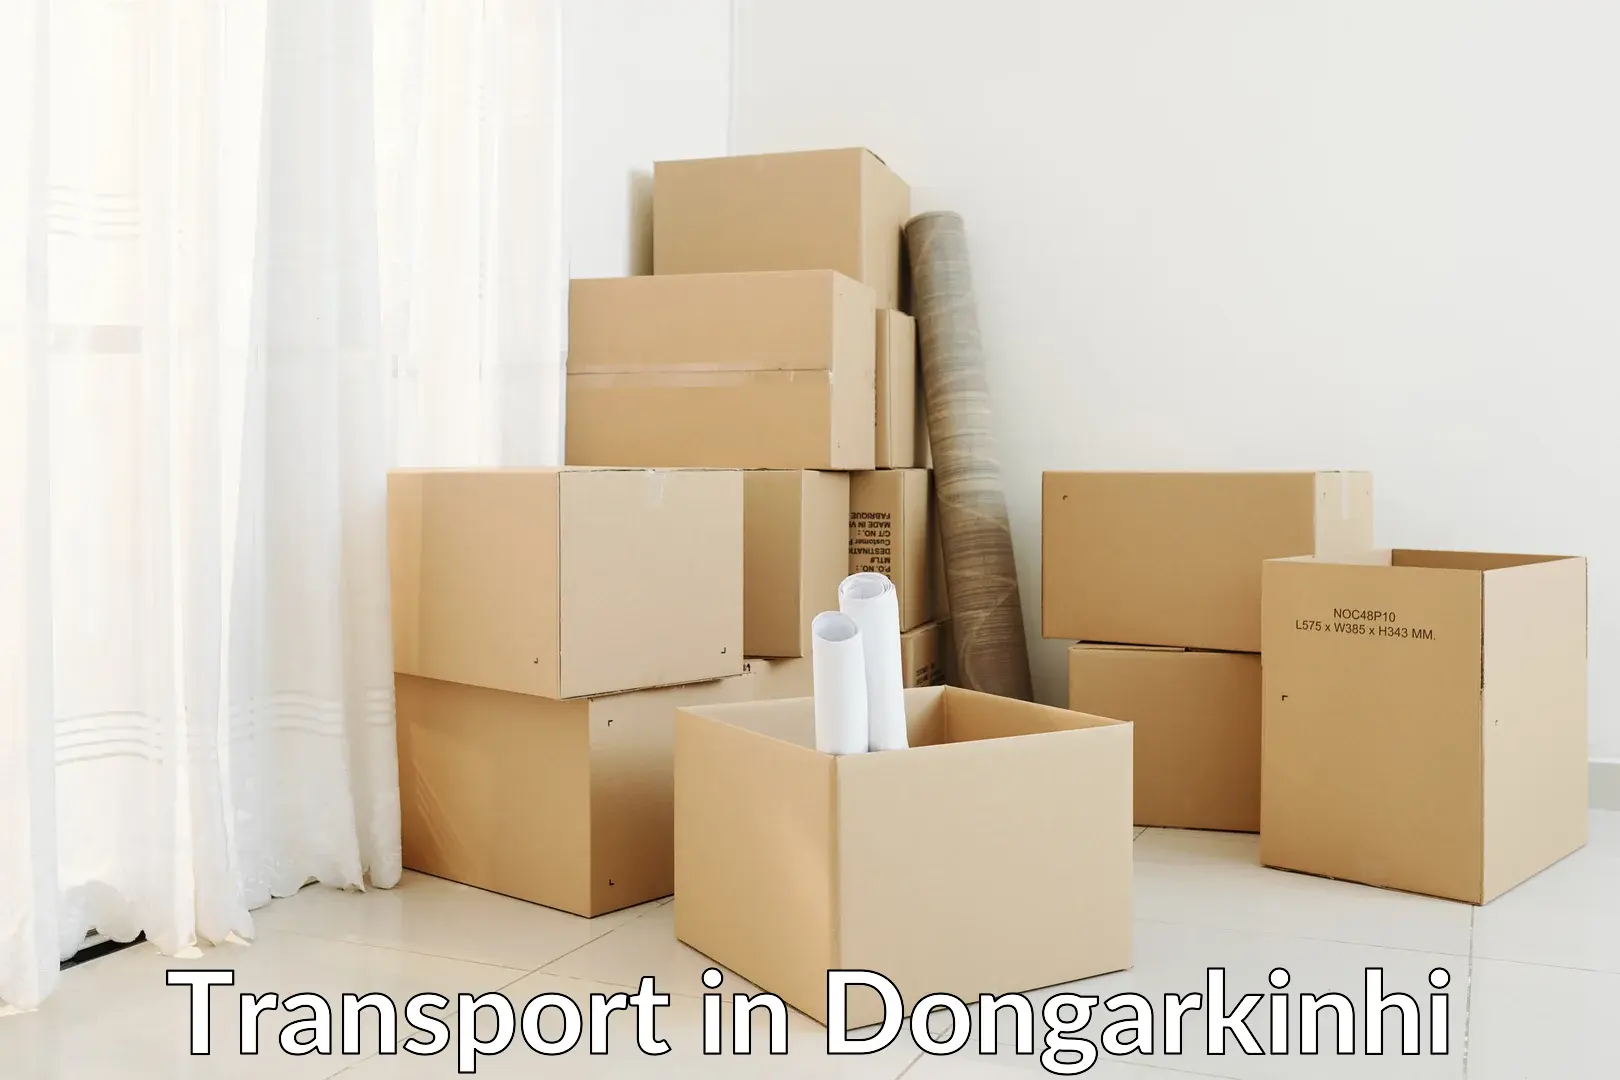 Air freight transport services in Dongarkinhi